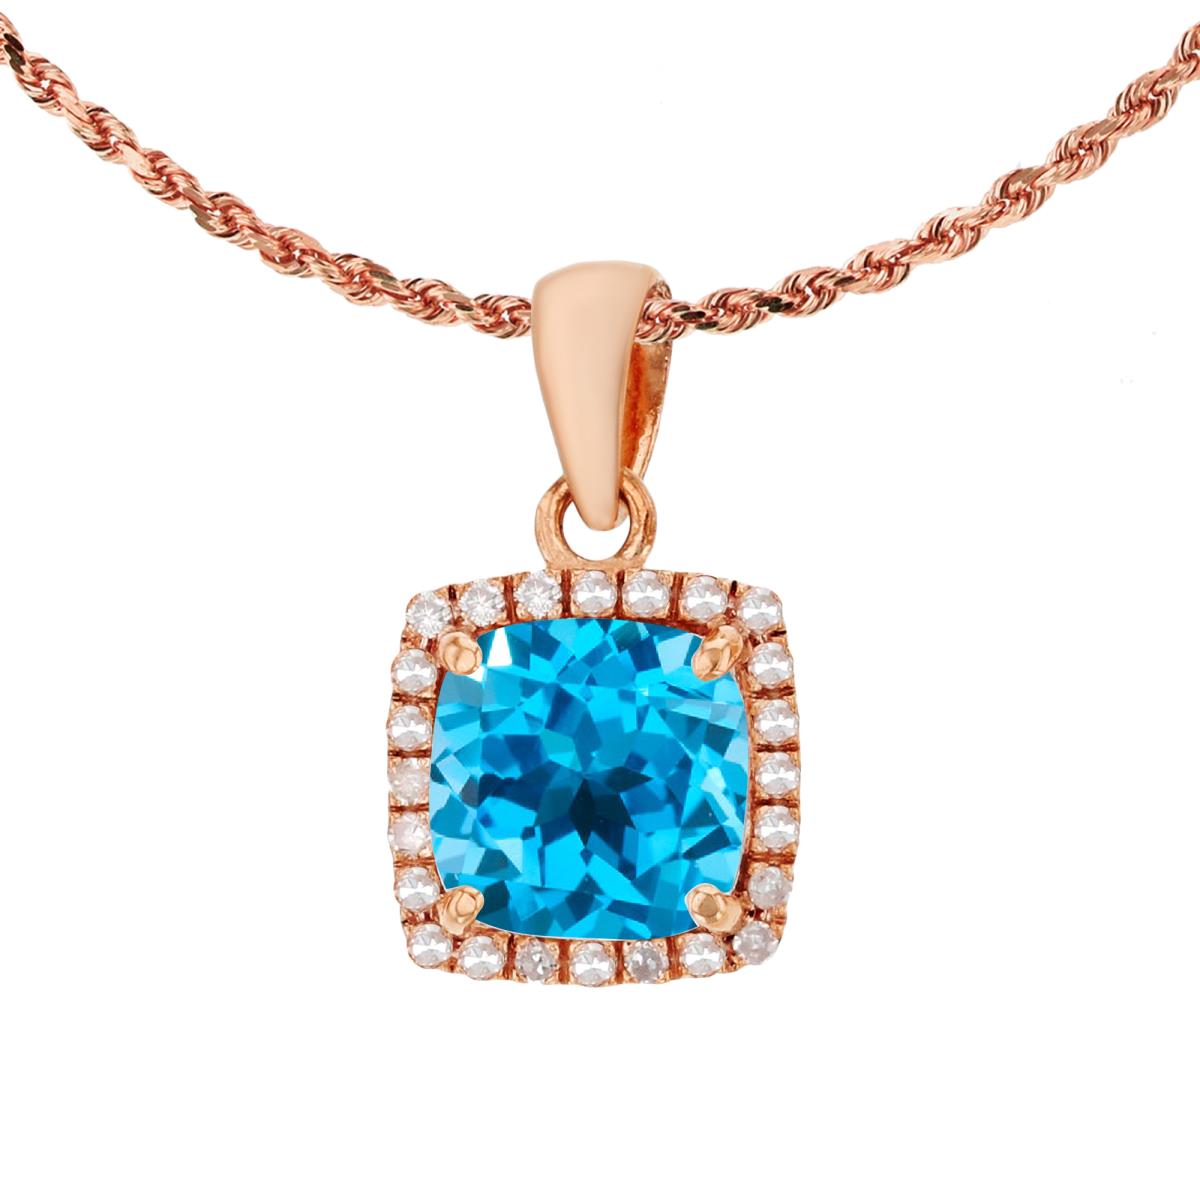 10K Rose Gold 7mm Cushion Swiss Blue Topaz & 0.12 CTTW Diamond Halo 18" Rope Chain Necklace